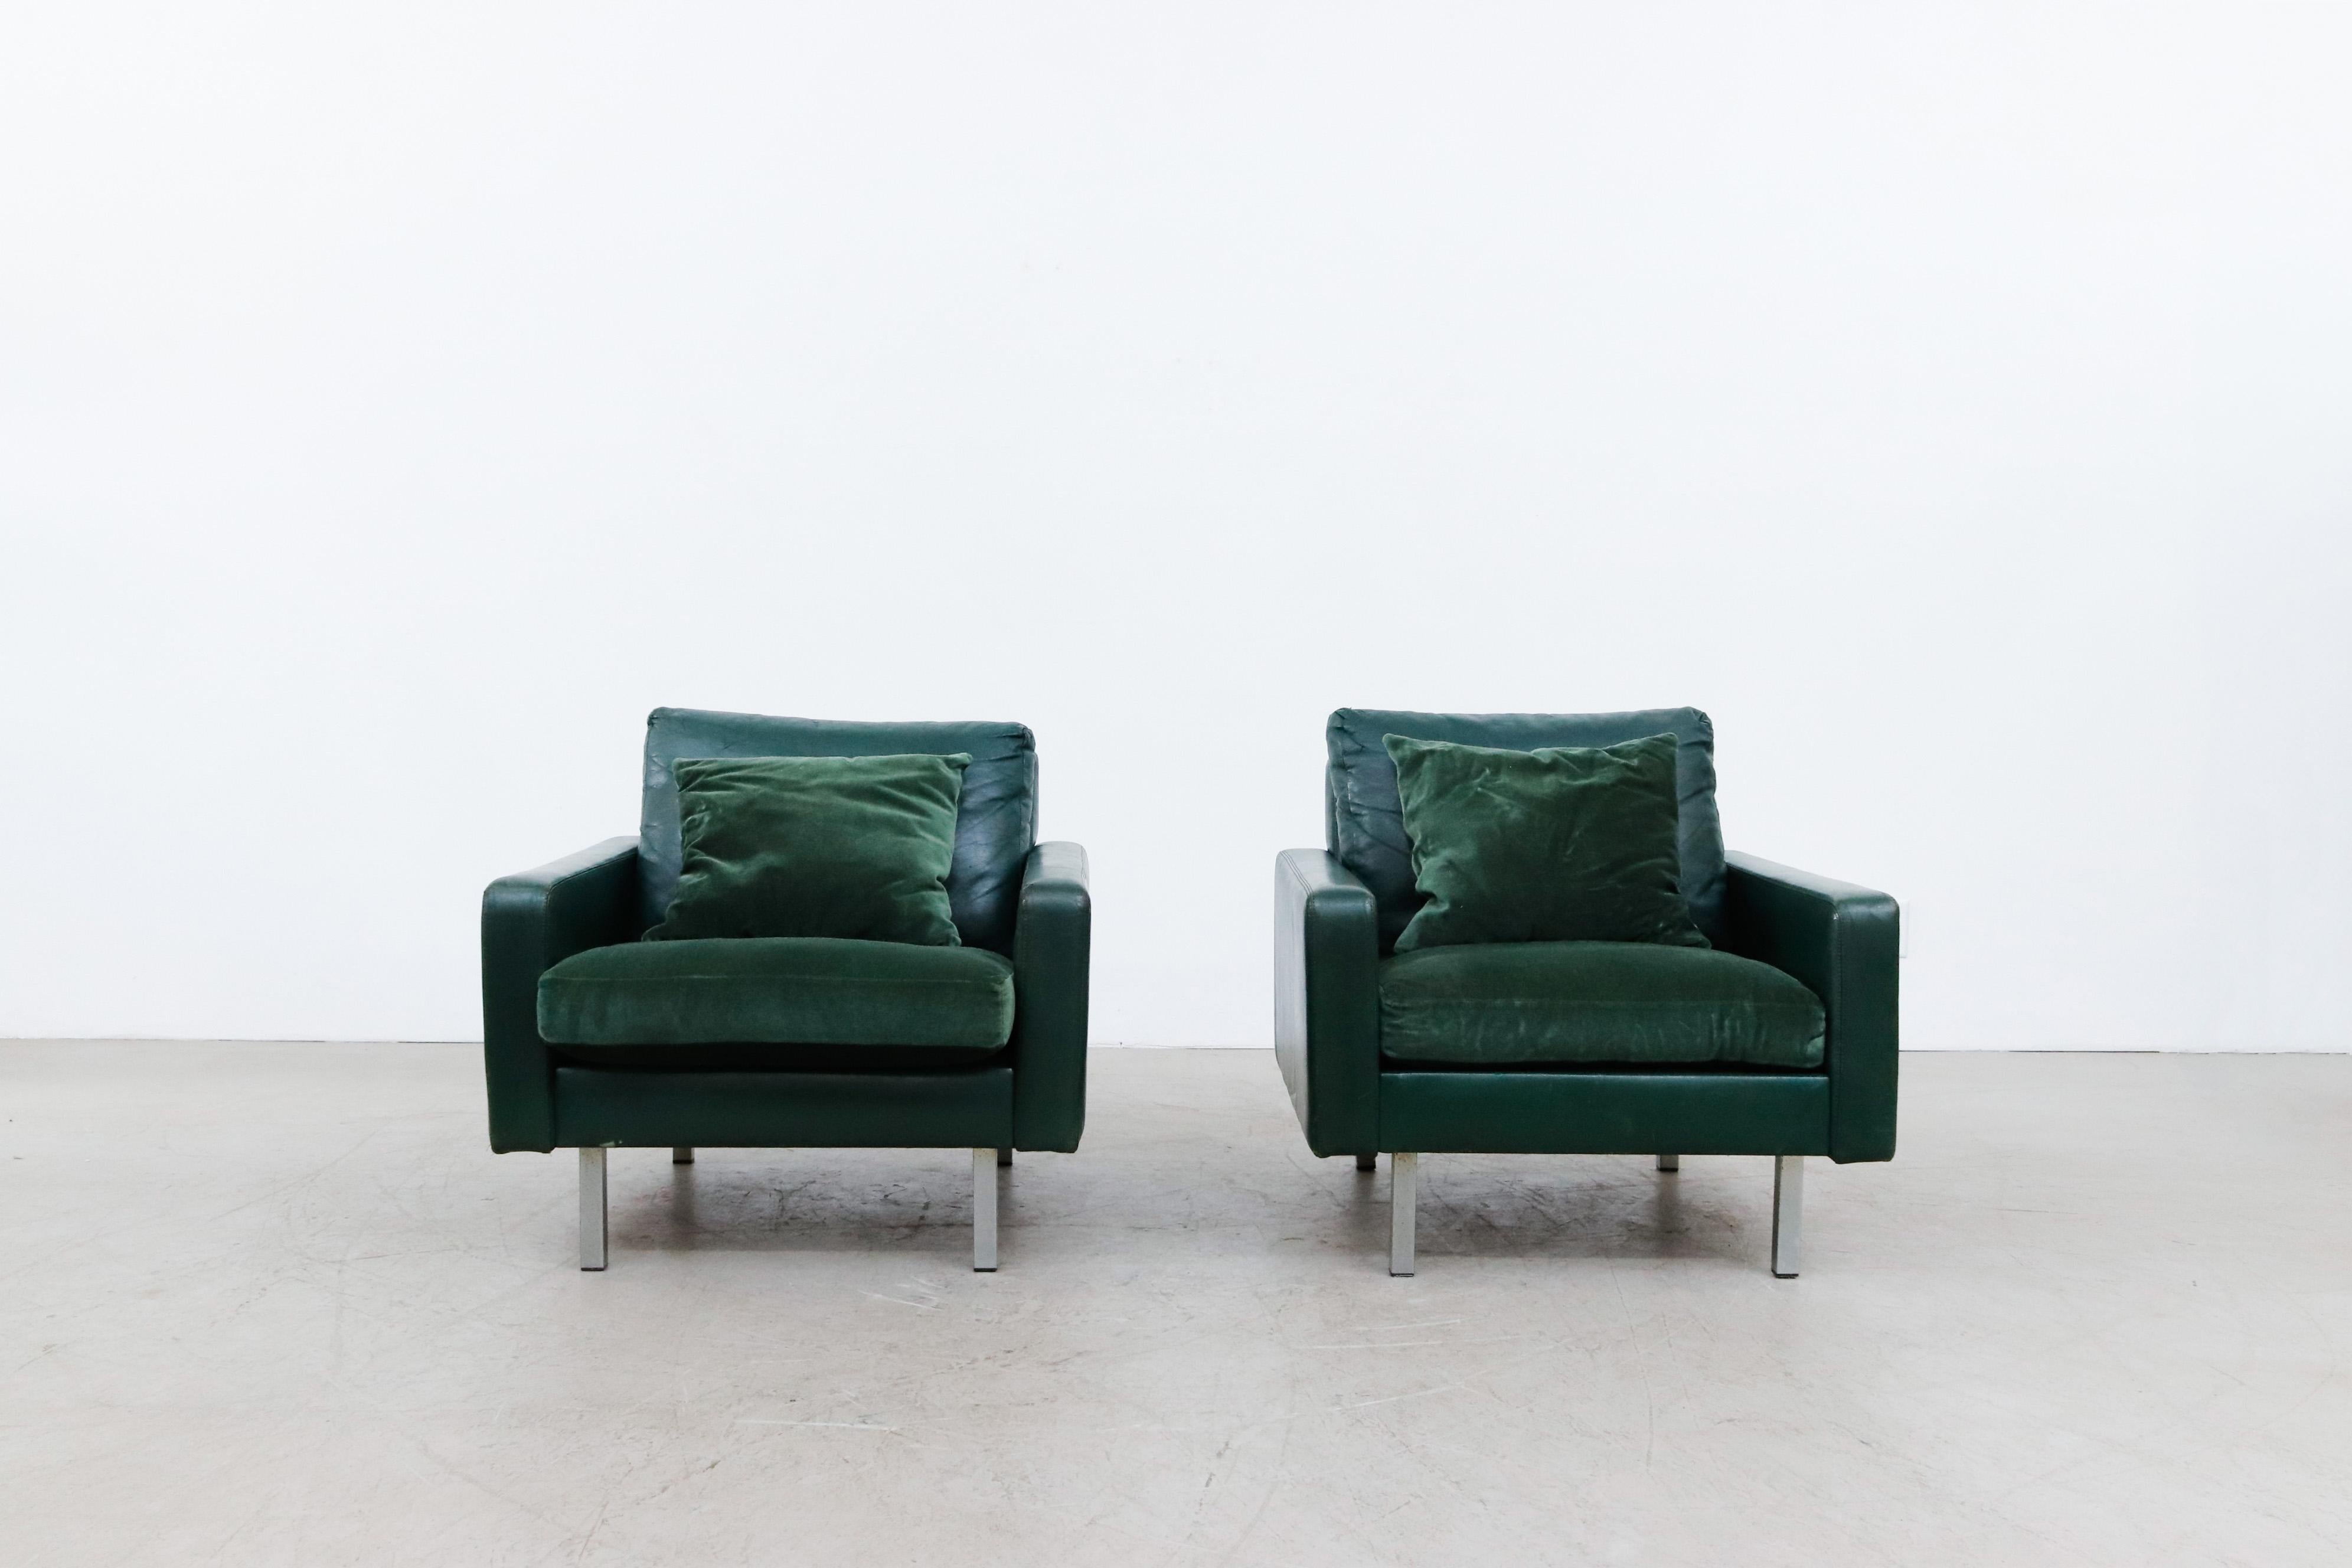 Pair of Artifort Green leather and emerald velvet lounge chairs with chrome legs. In original condition with visible patina and wear consistent with their age and use. Set price. Shown with Philips Salmon table lamp.